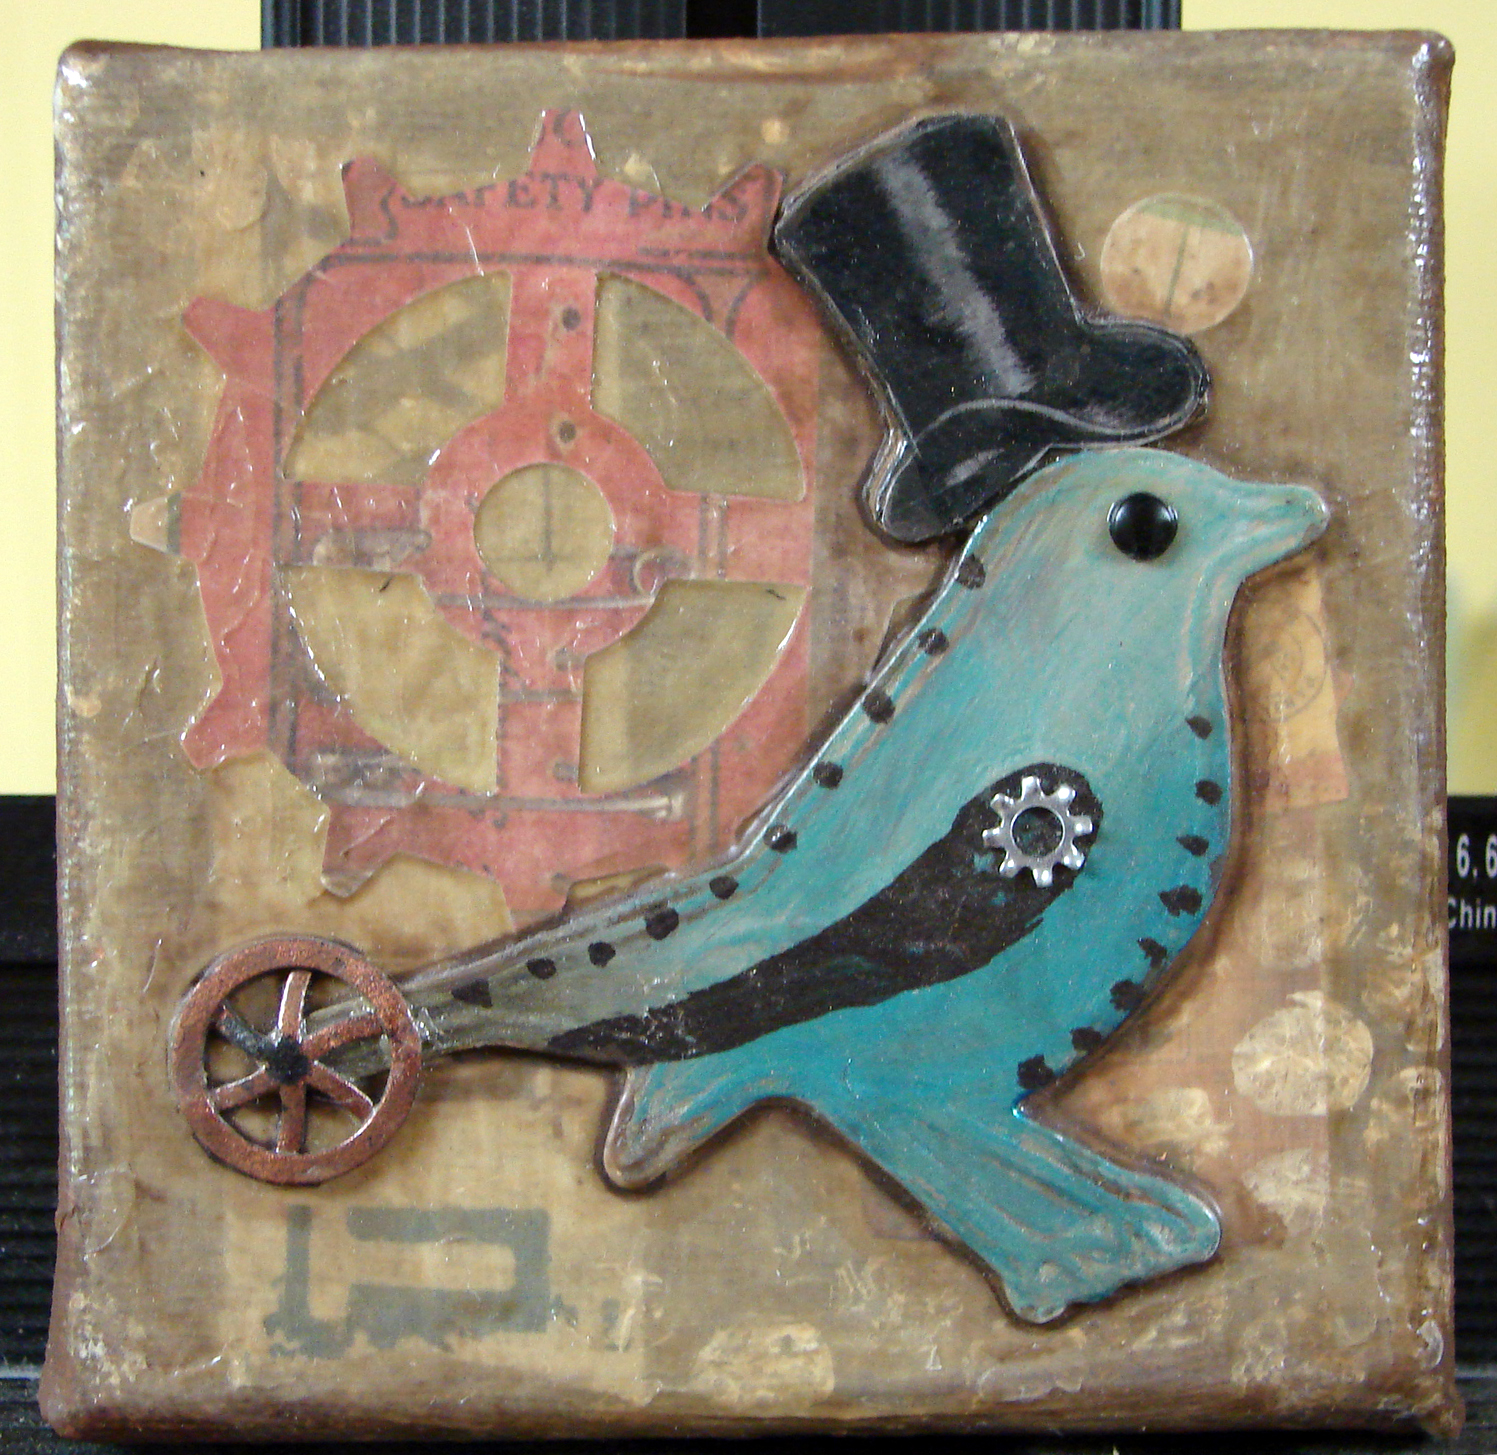 Small Mixed Media Assemblage Art on Canvas, 5